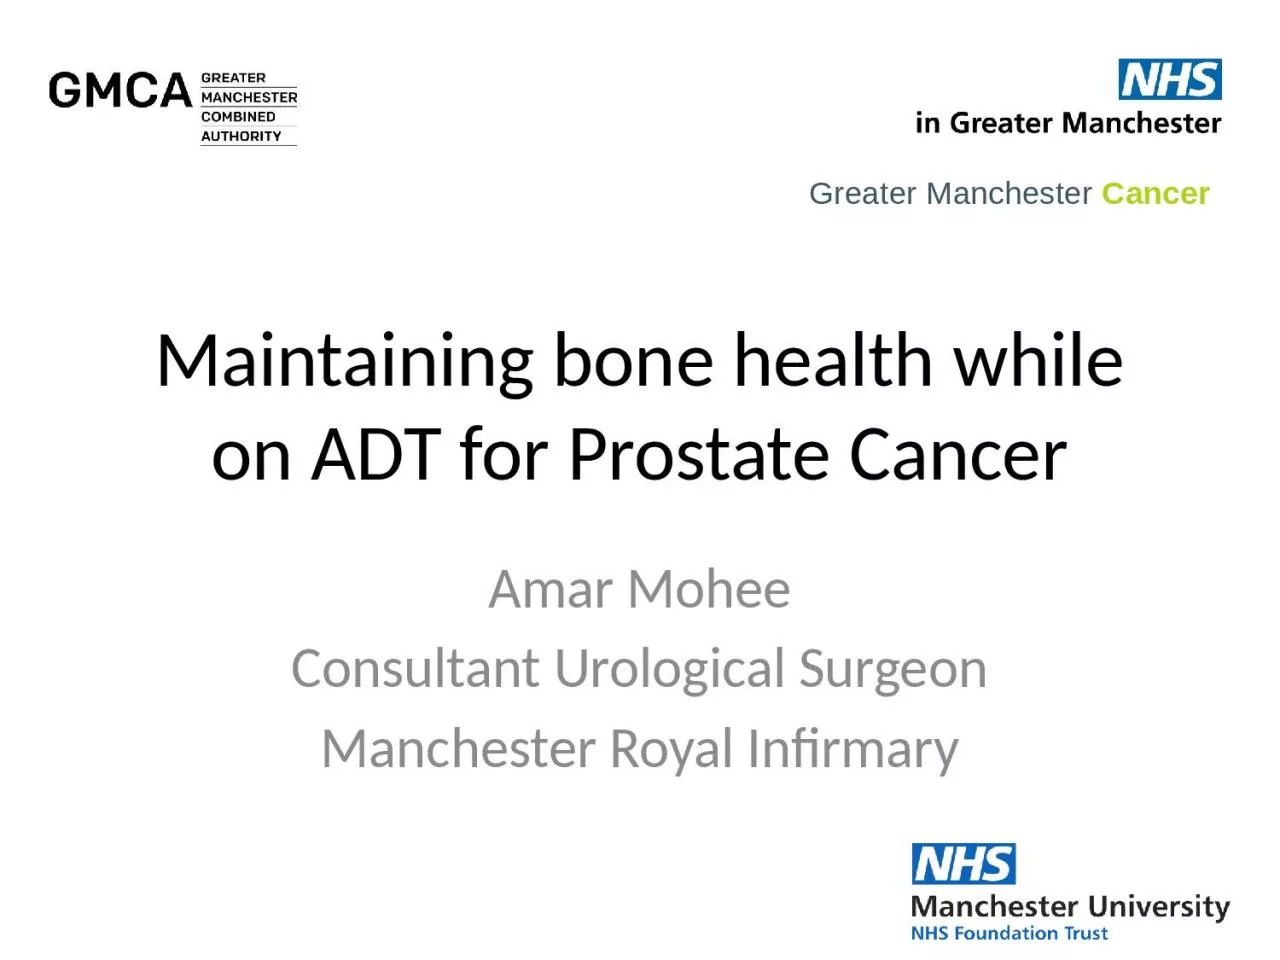 Maintaining bone health while on ADT for Prostate Cancer